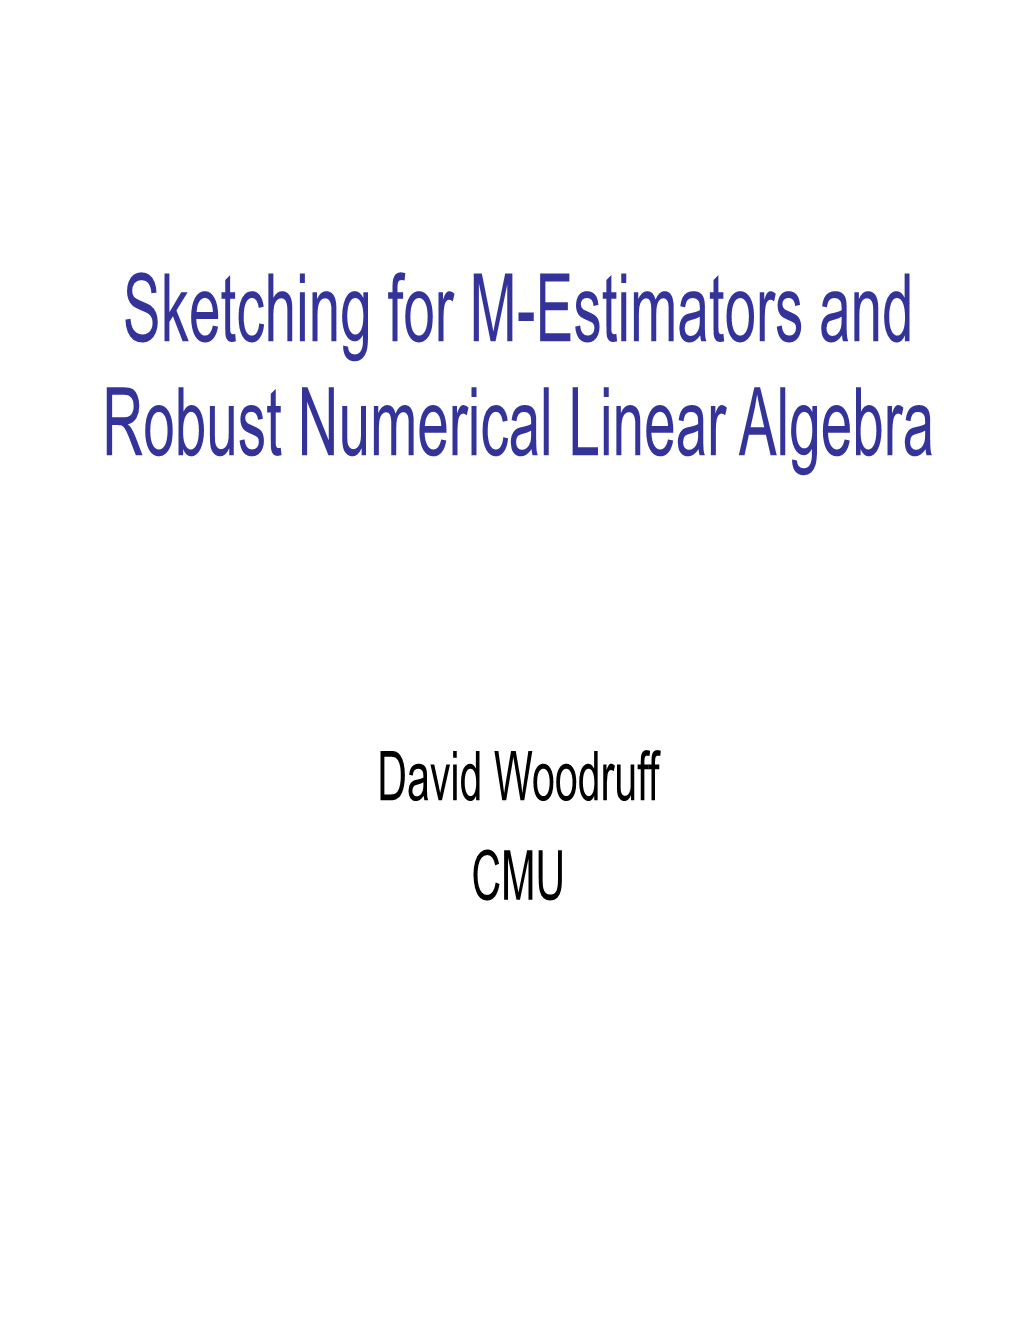 Sketching for M-Estimators and Robust Numerical Linear Algebra